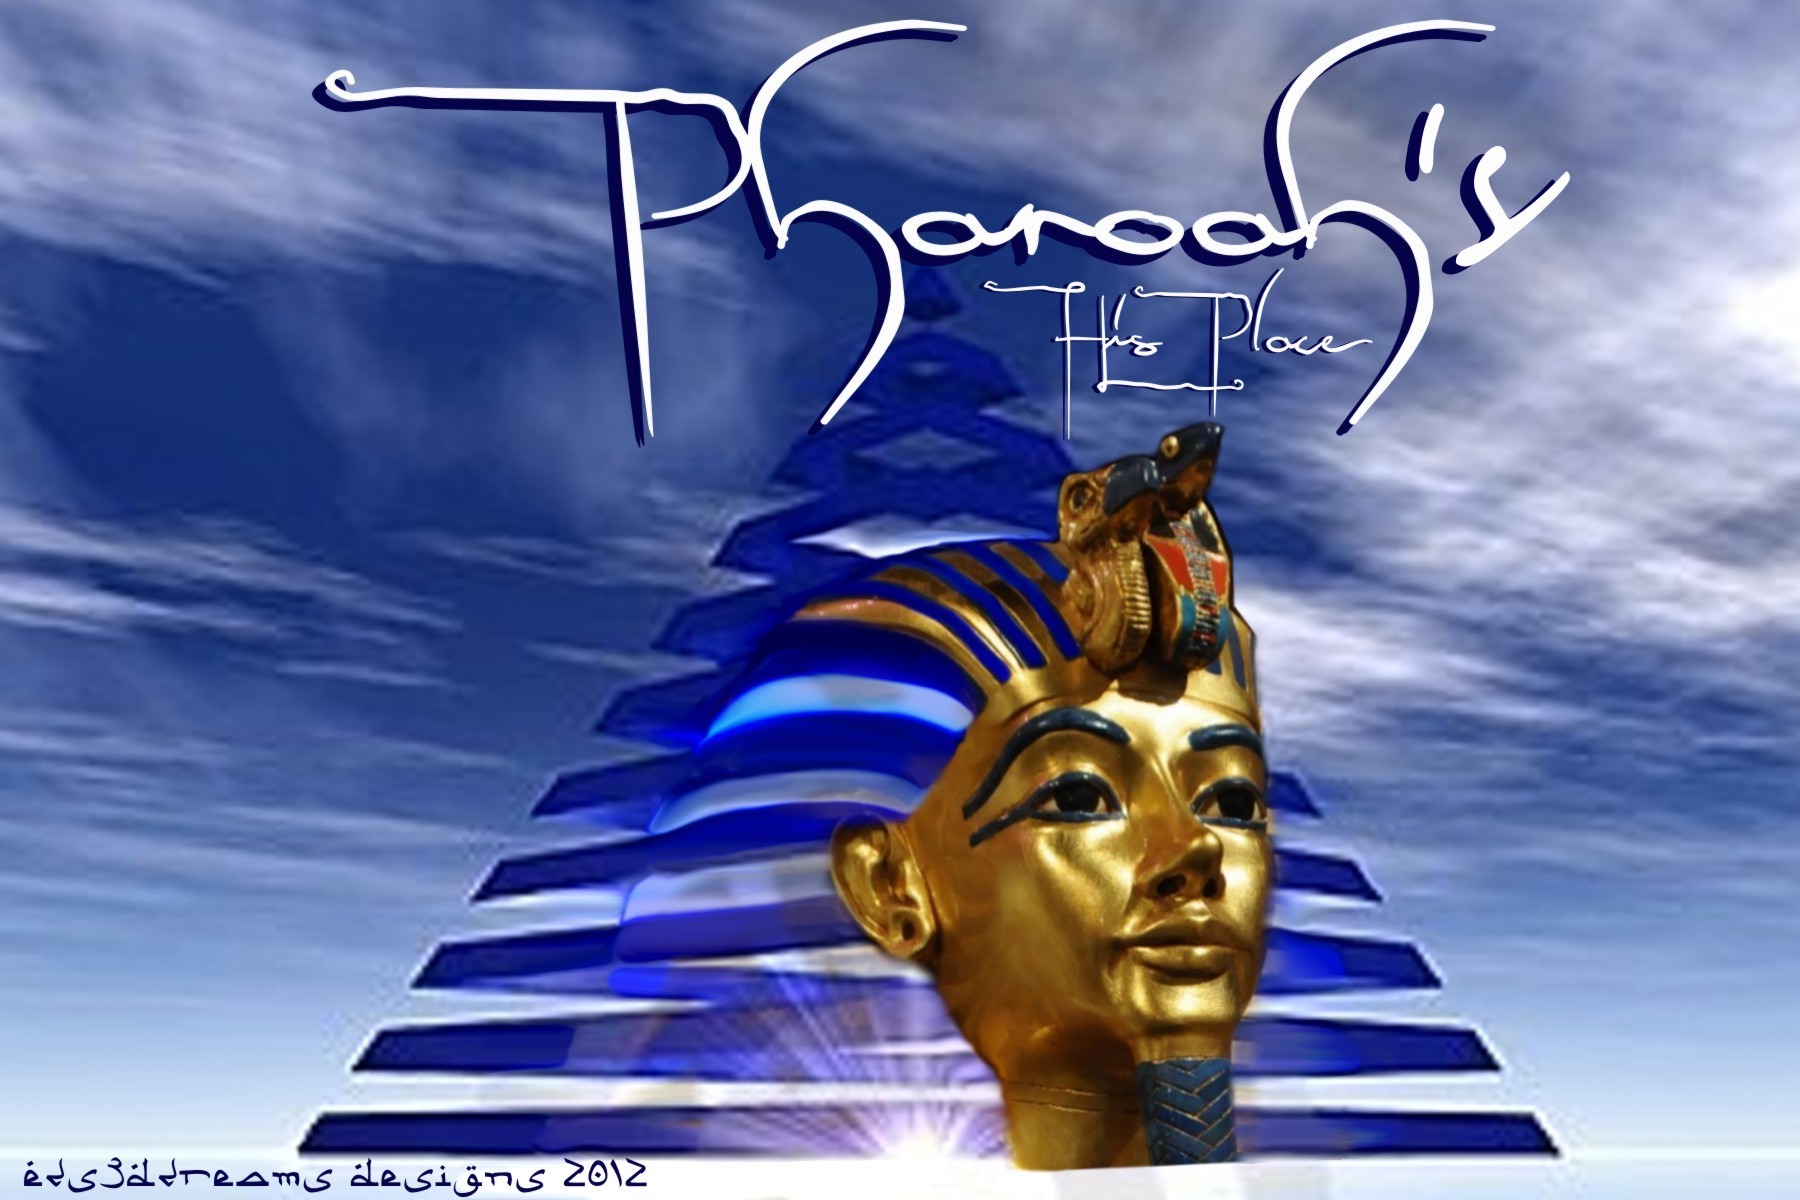 Pharaoh's...His Place